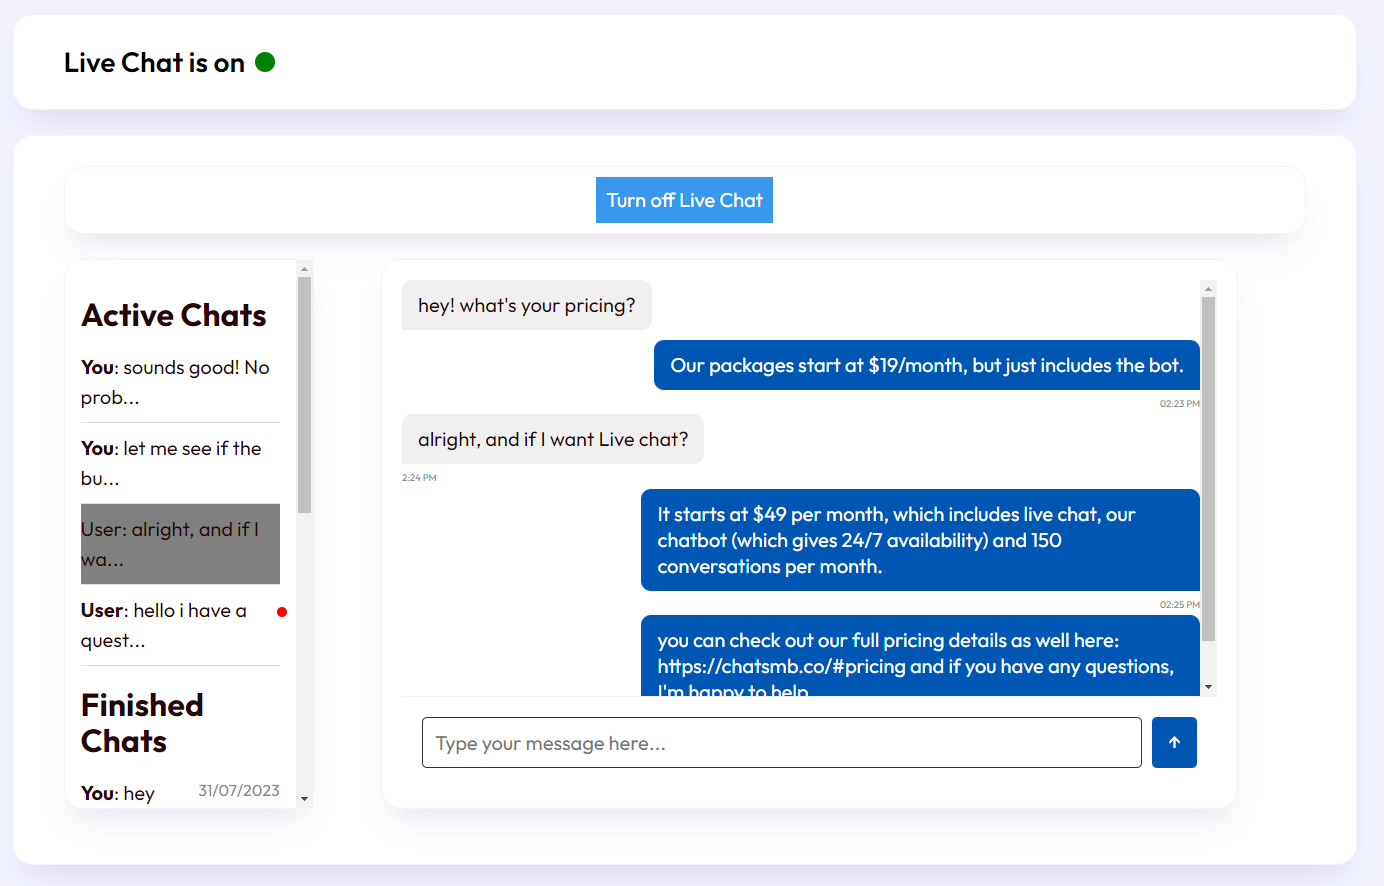 ChatSMB's live chat feature